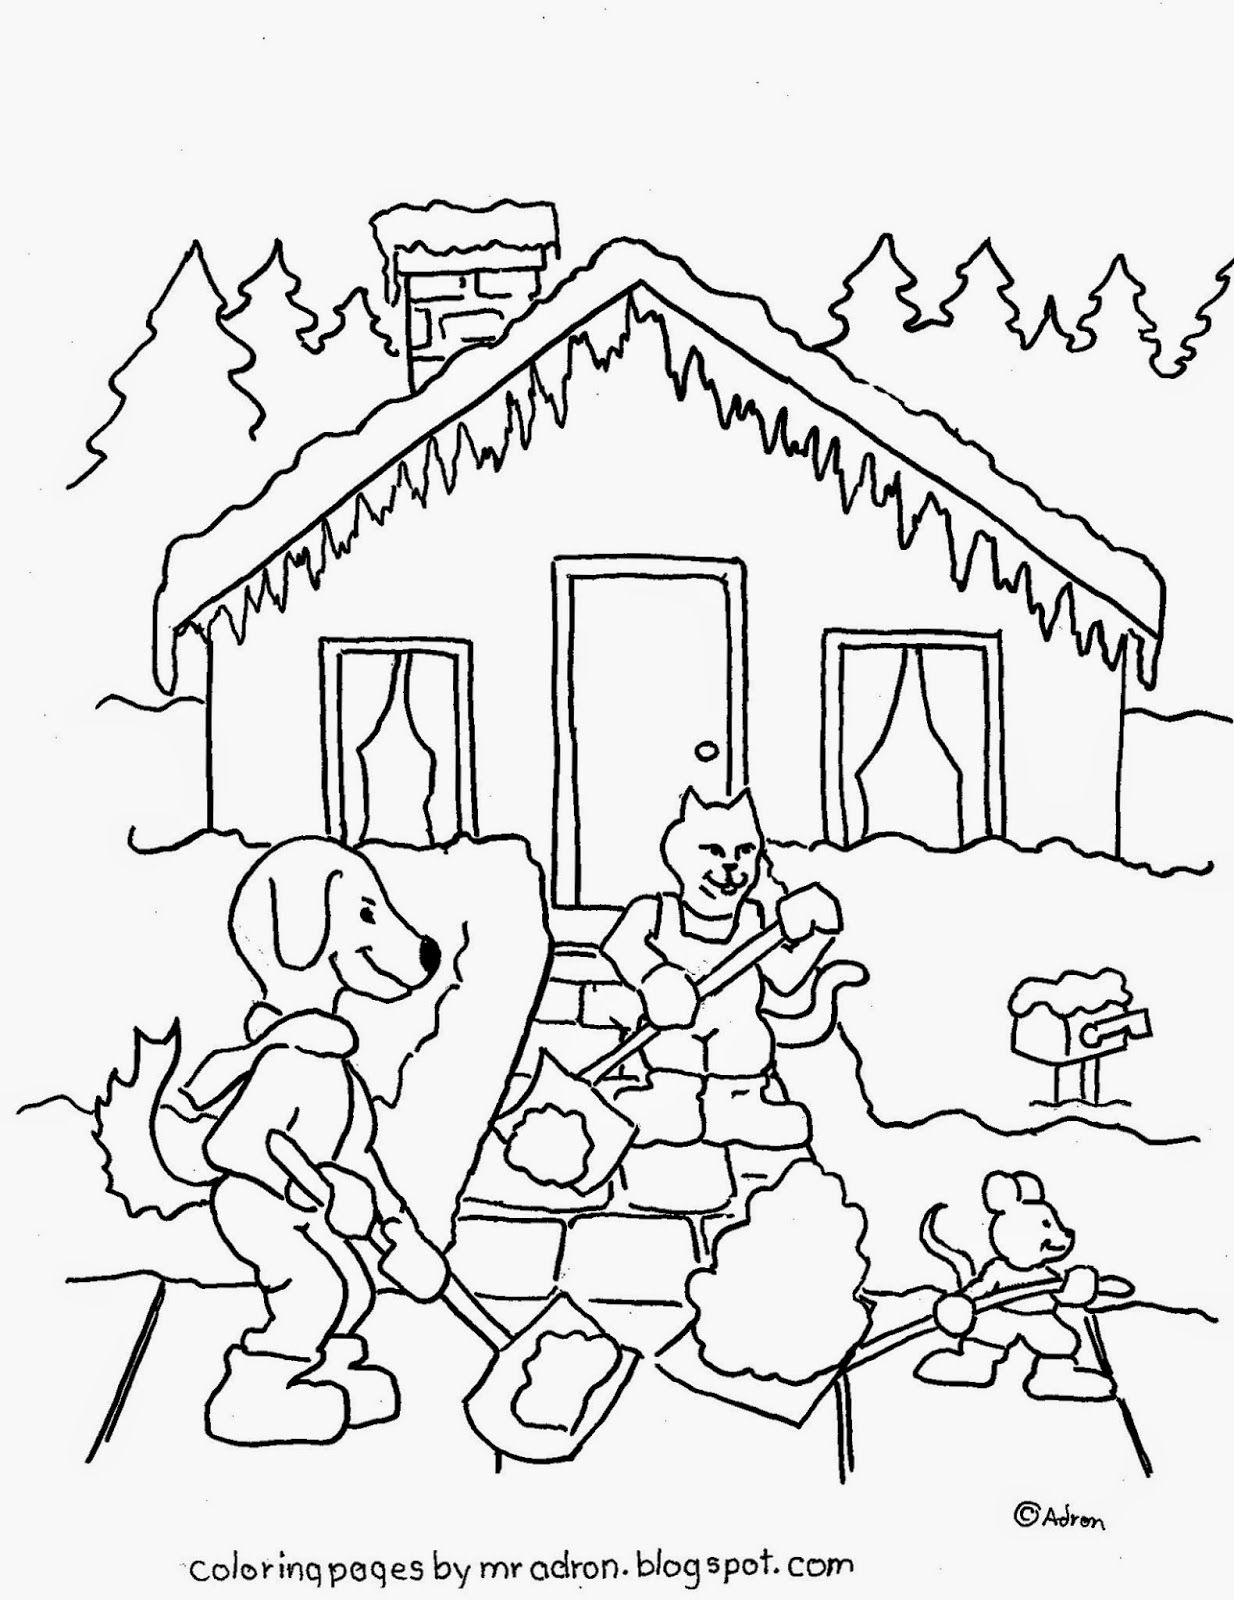 Coloring Pages for Kids by Mr. Adron: Free Coloring Page Animal ...